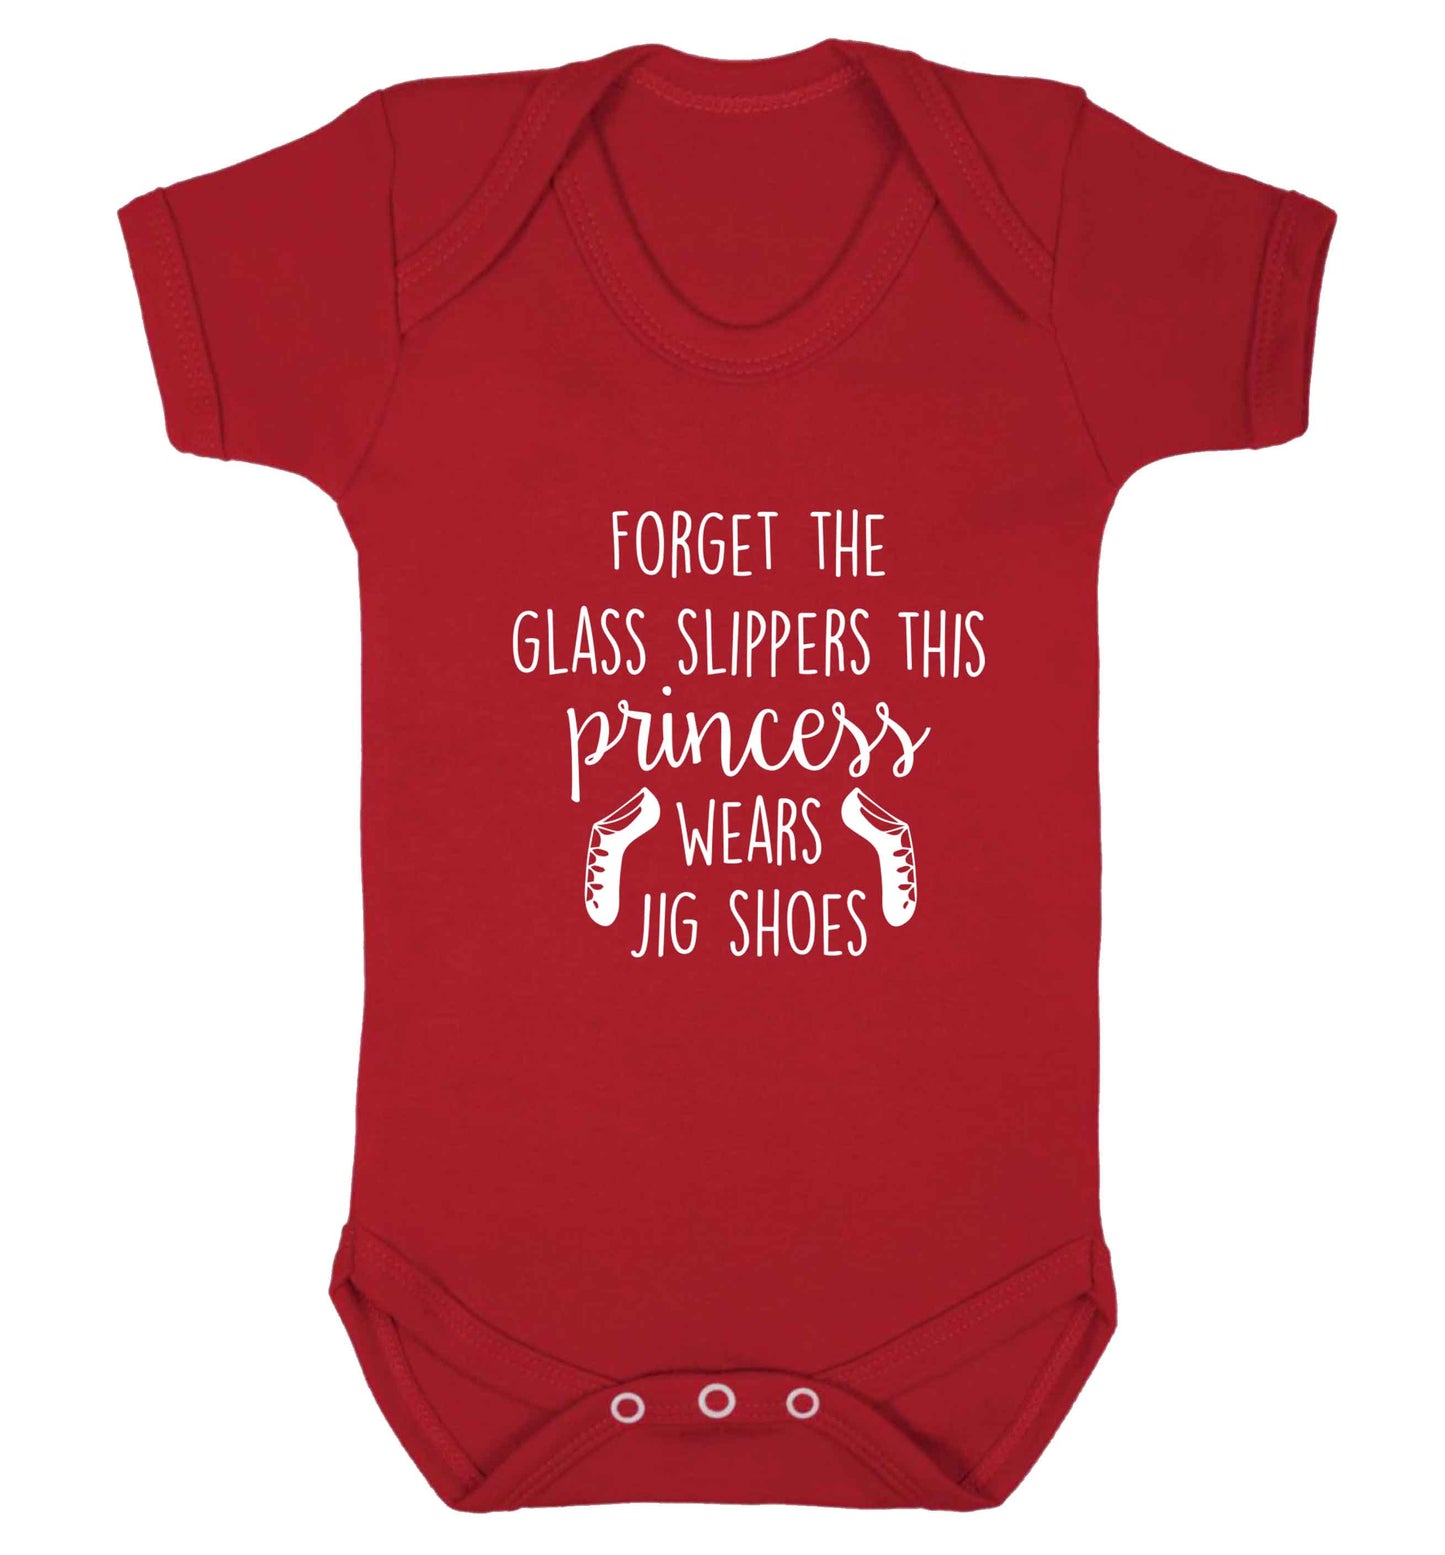 This princess wears jig shoes baby vest red 18-24 months